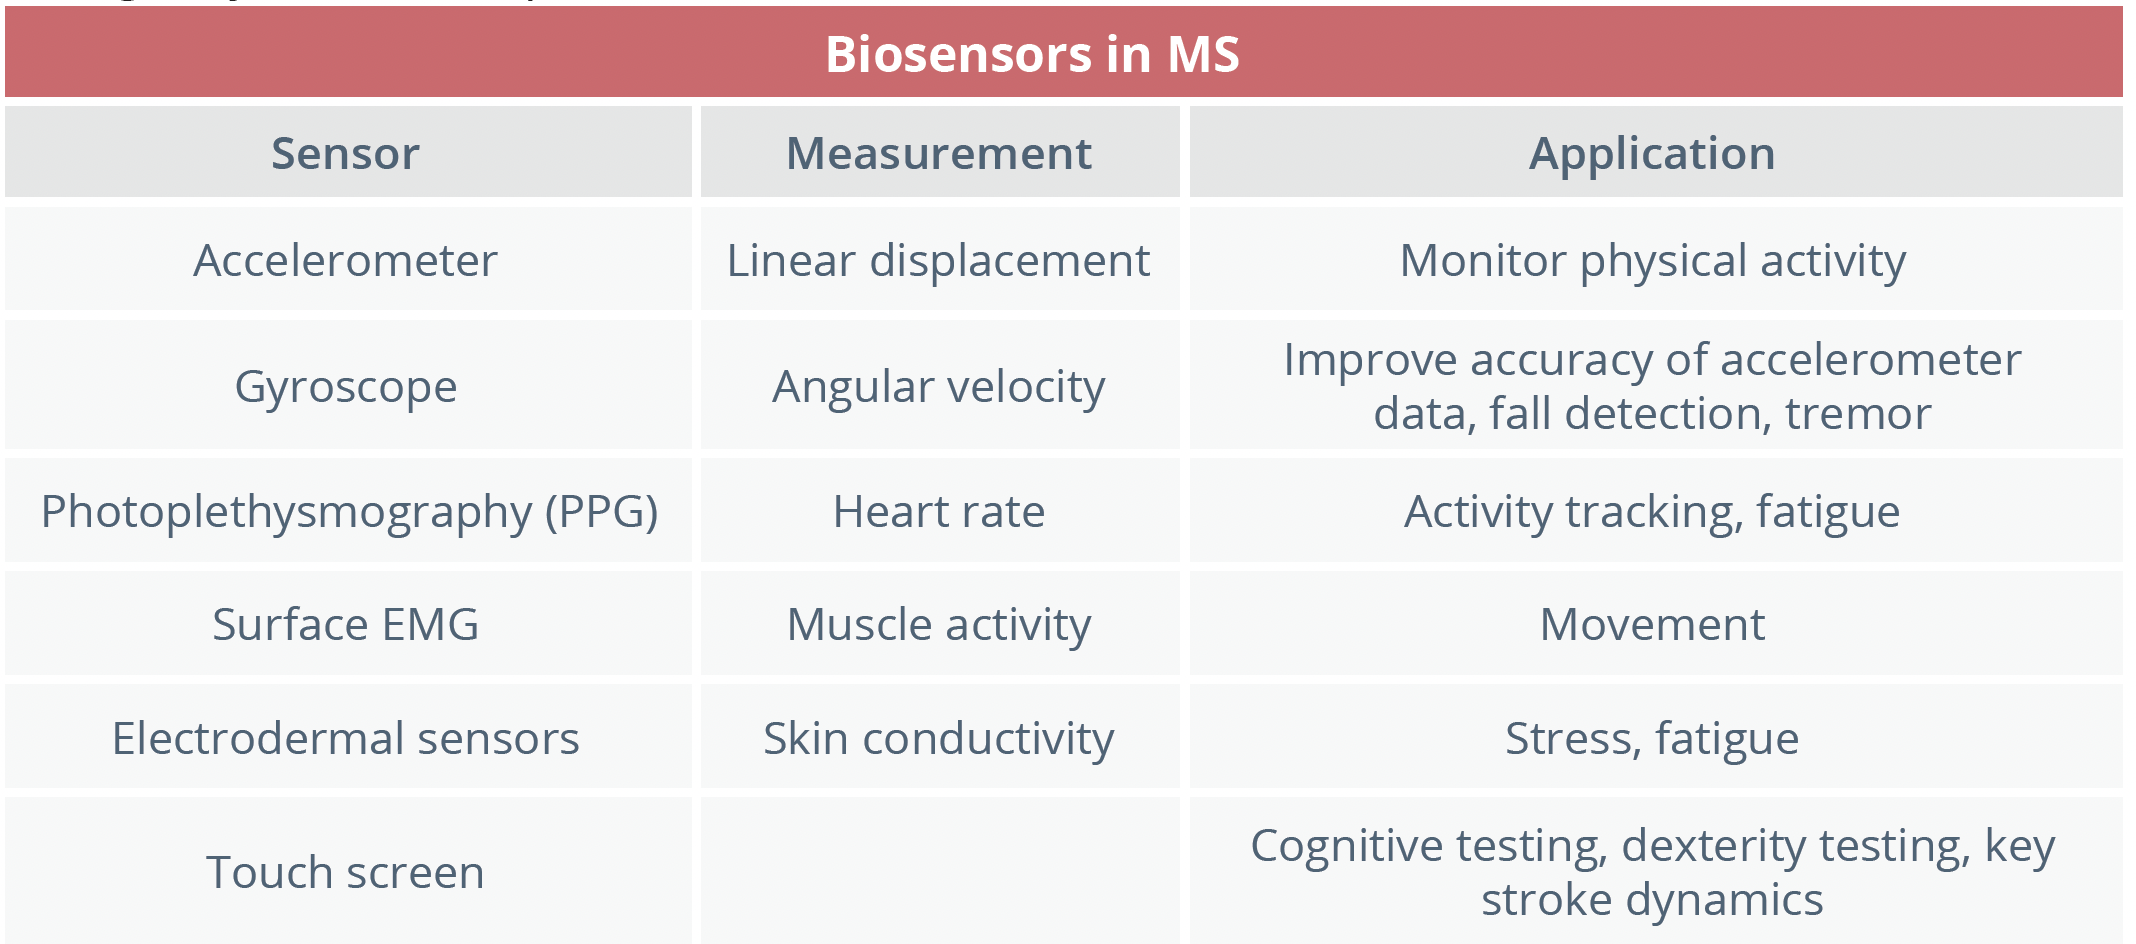 Biosensing provides the opportunity to capture patient function and symptoms